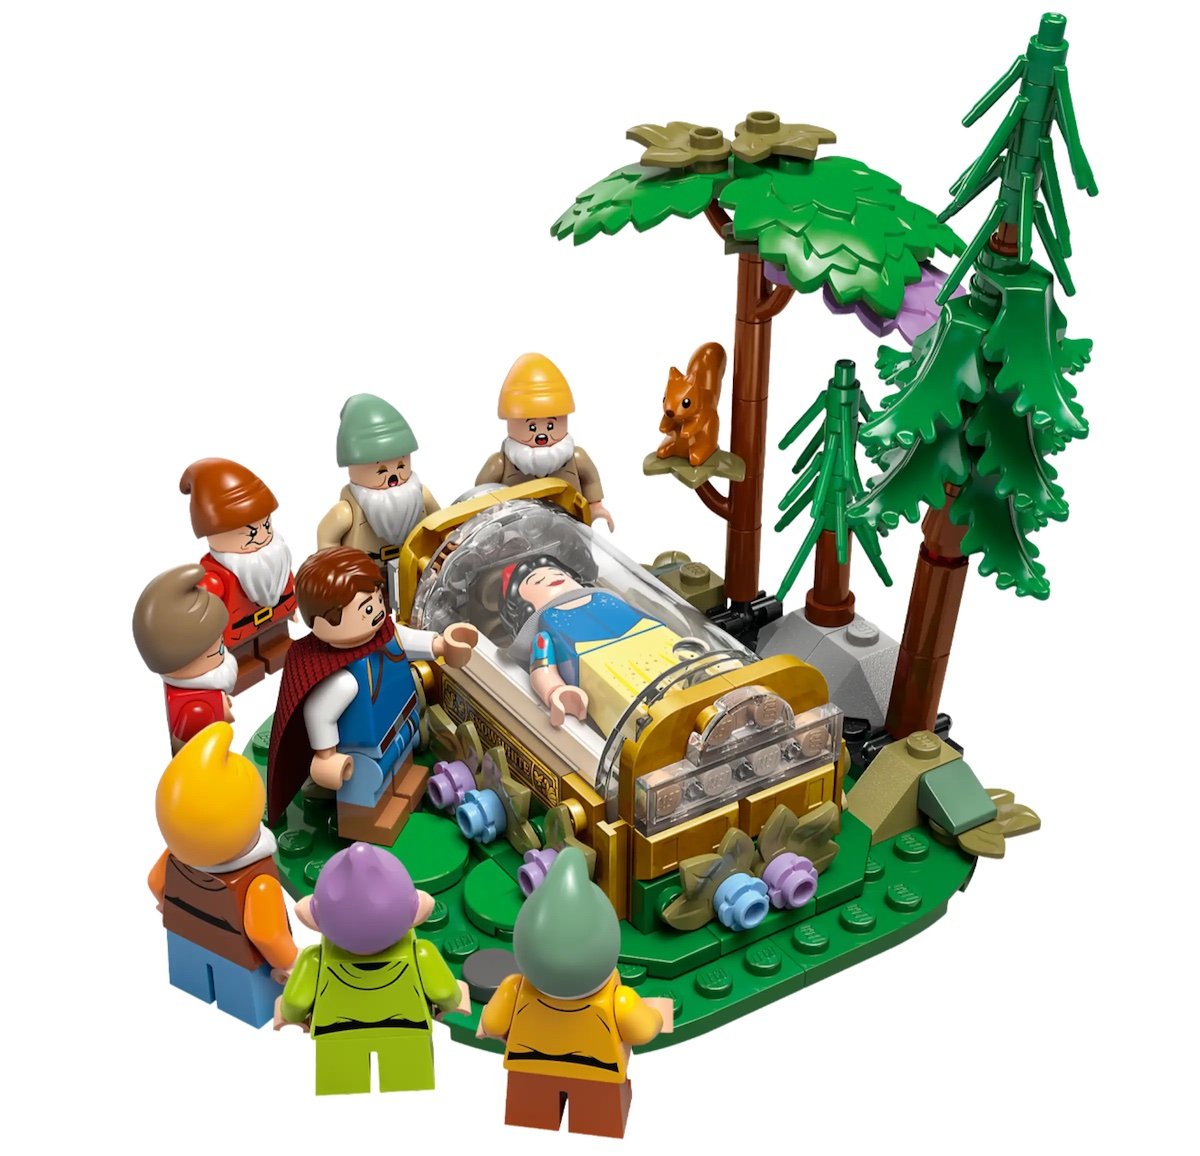 LEGO Snow White in a sleeping chamber surrounded by trees and the Seven Dwarves